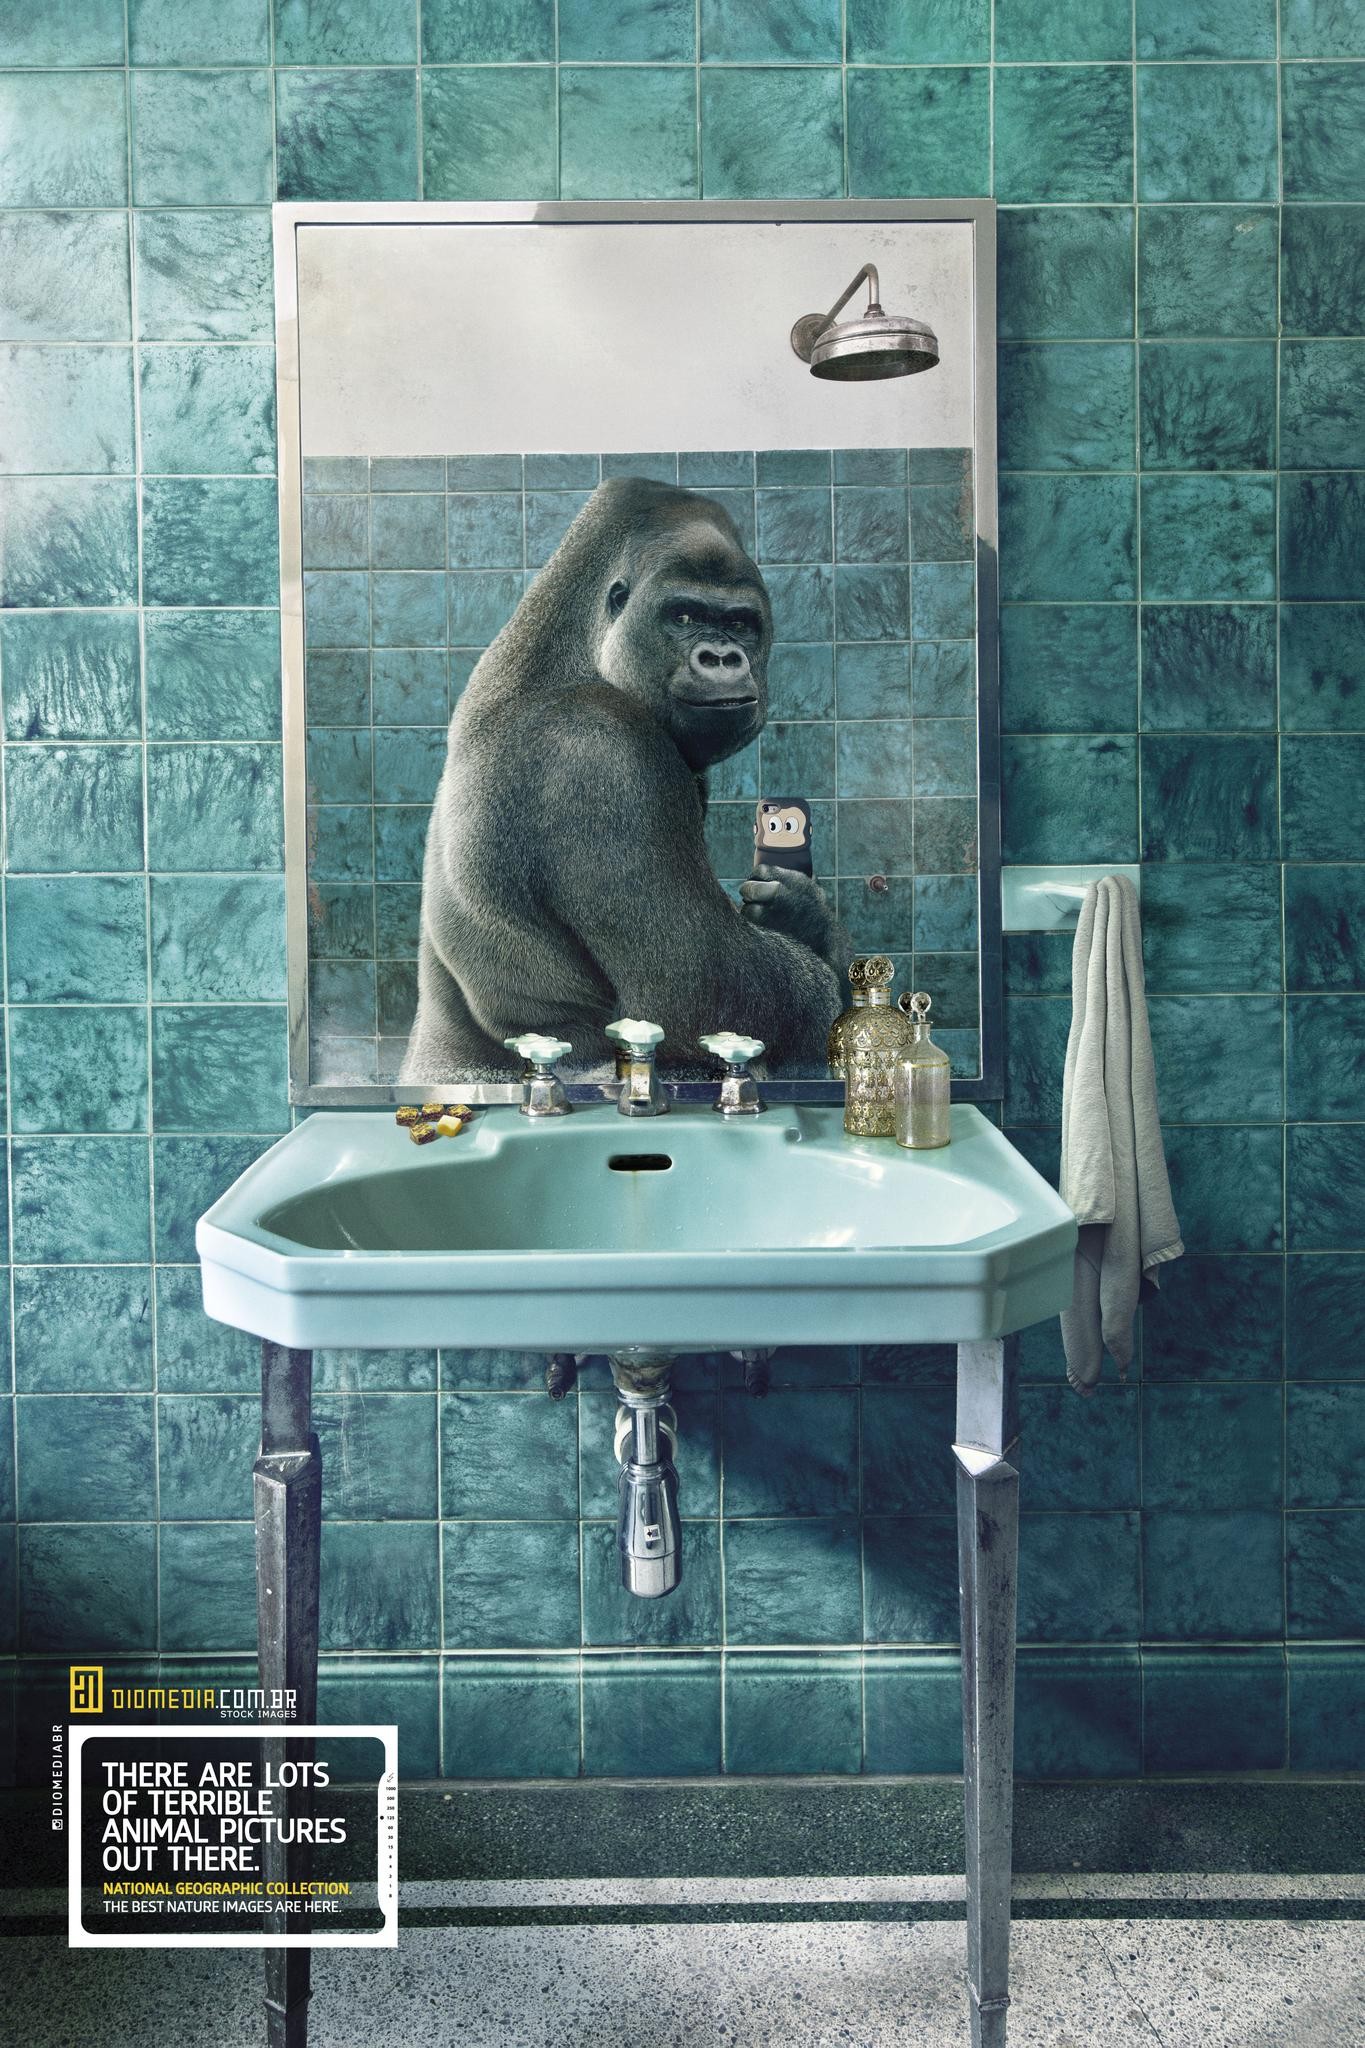 NEW COLLECTION NATIONAL GEOGRAPHIC IMAGES